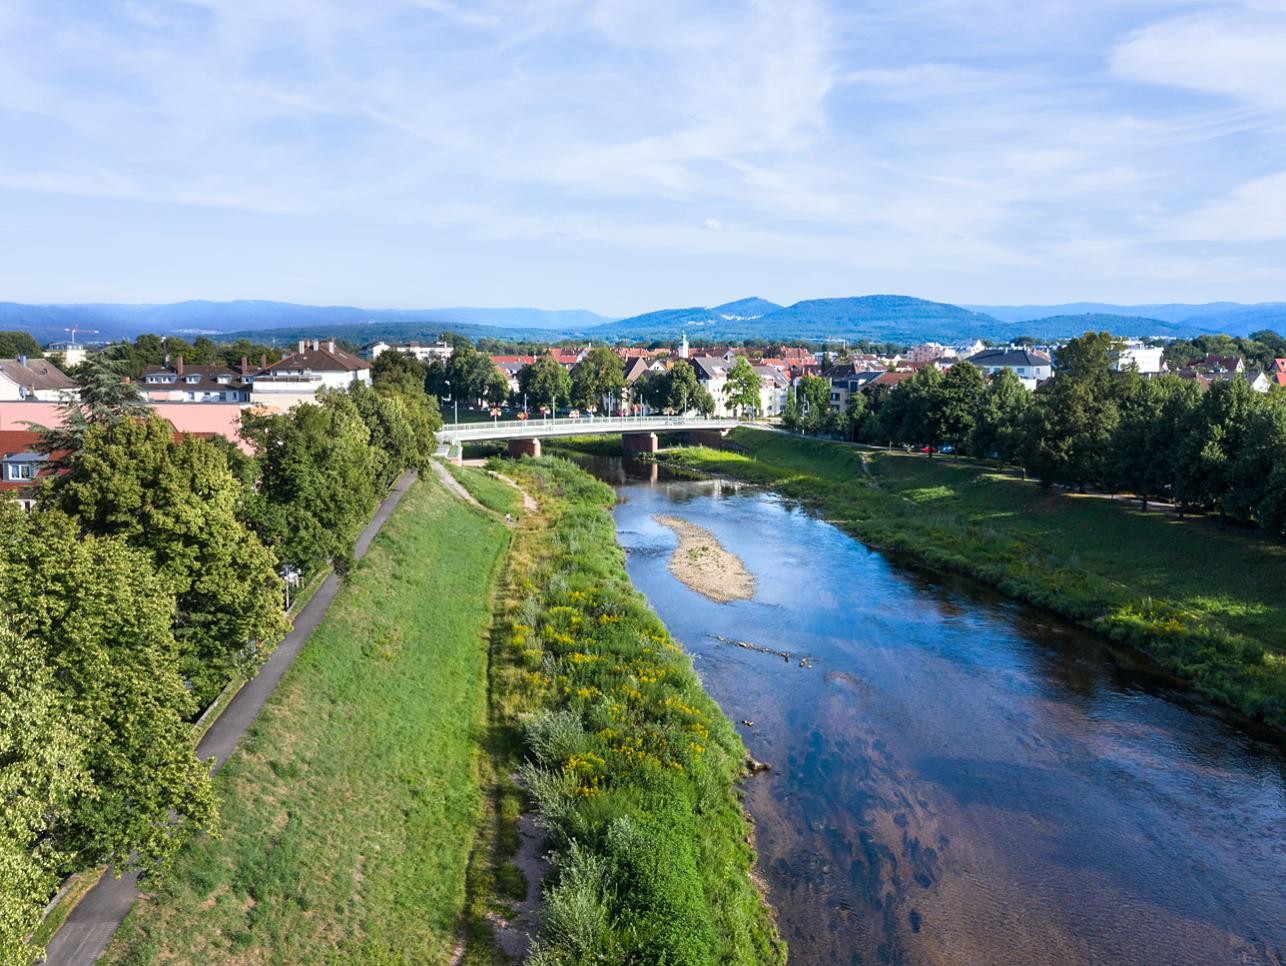 The Murg river is to become a better experience in the Rastatt urban area.